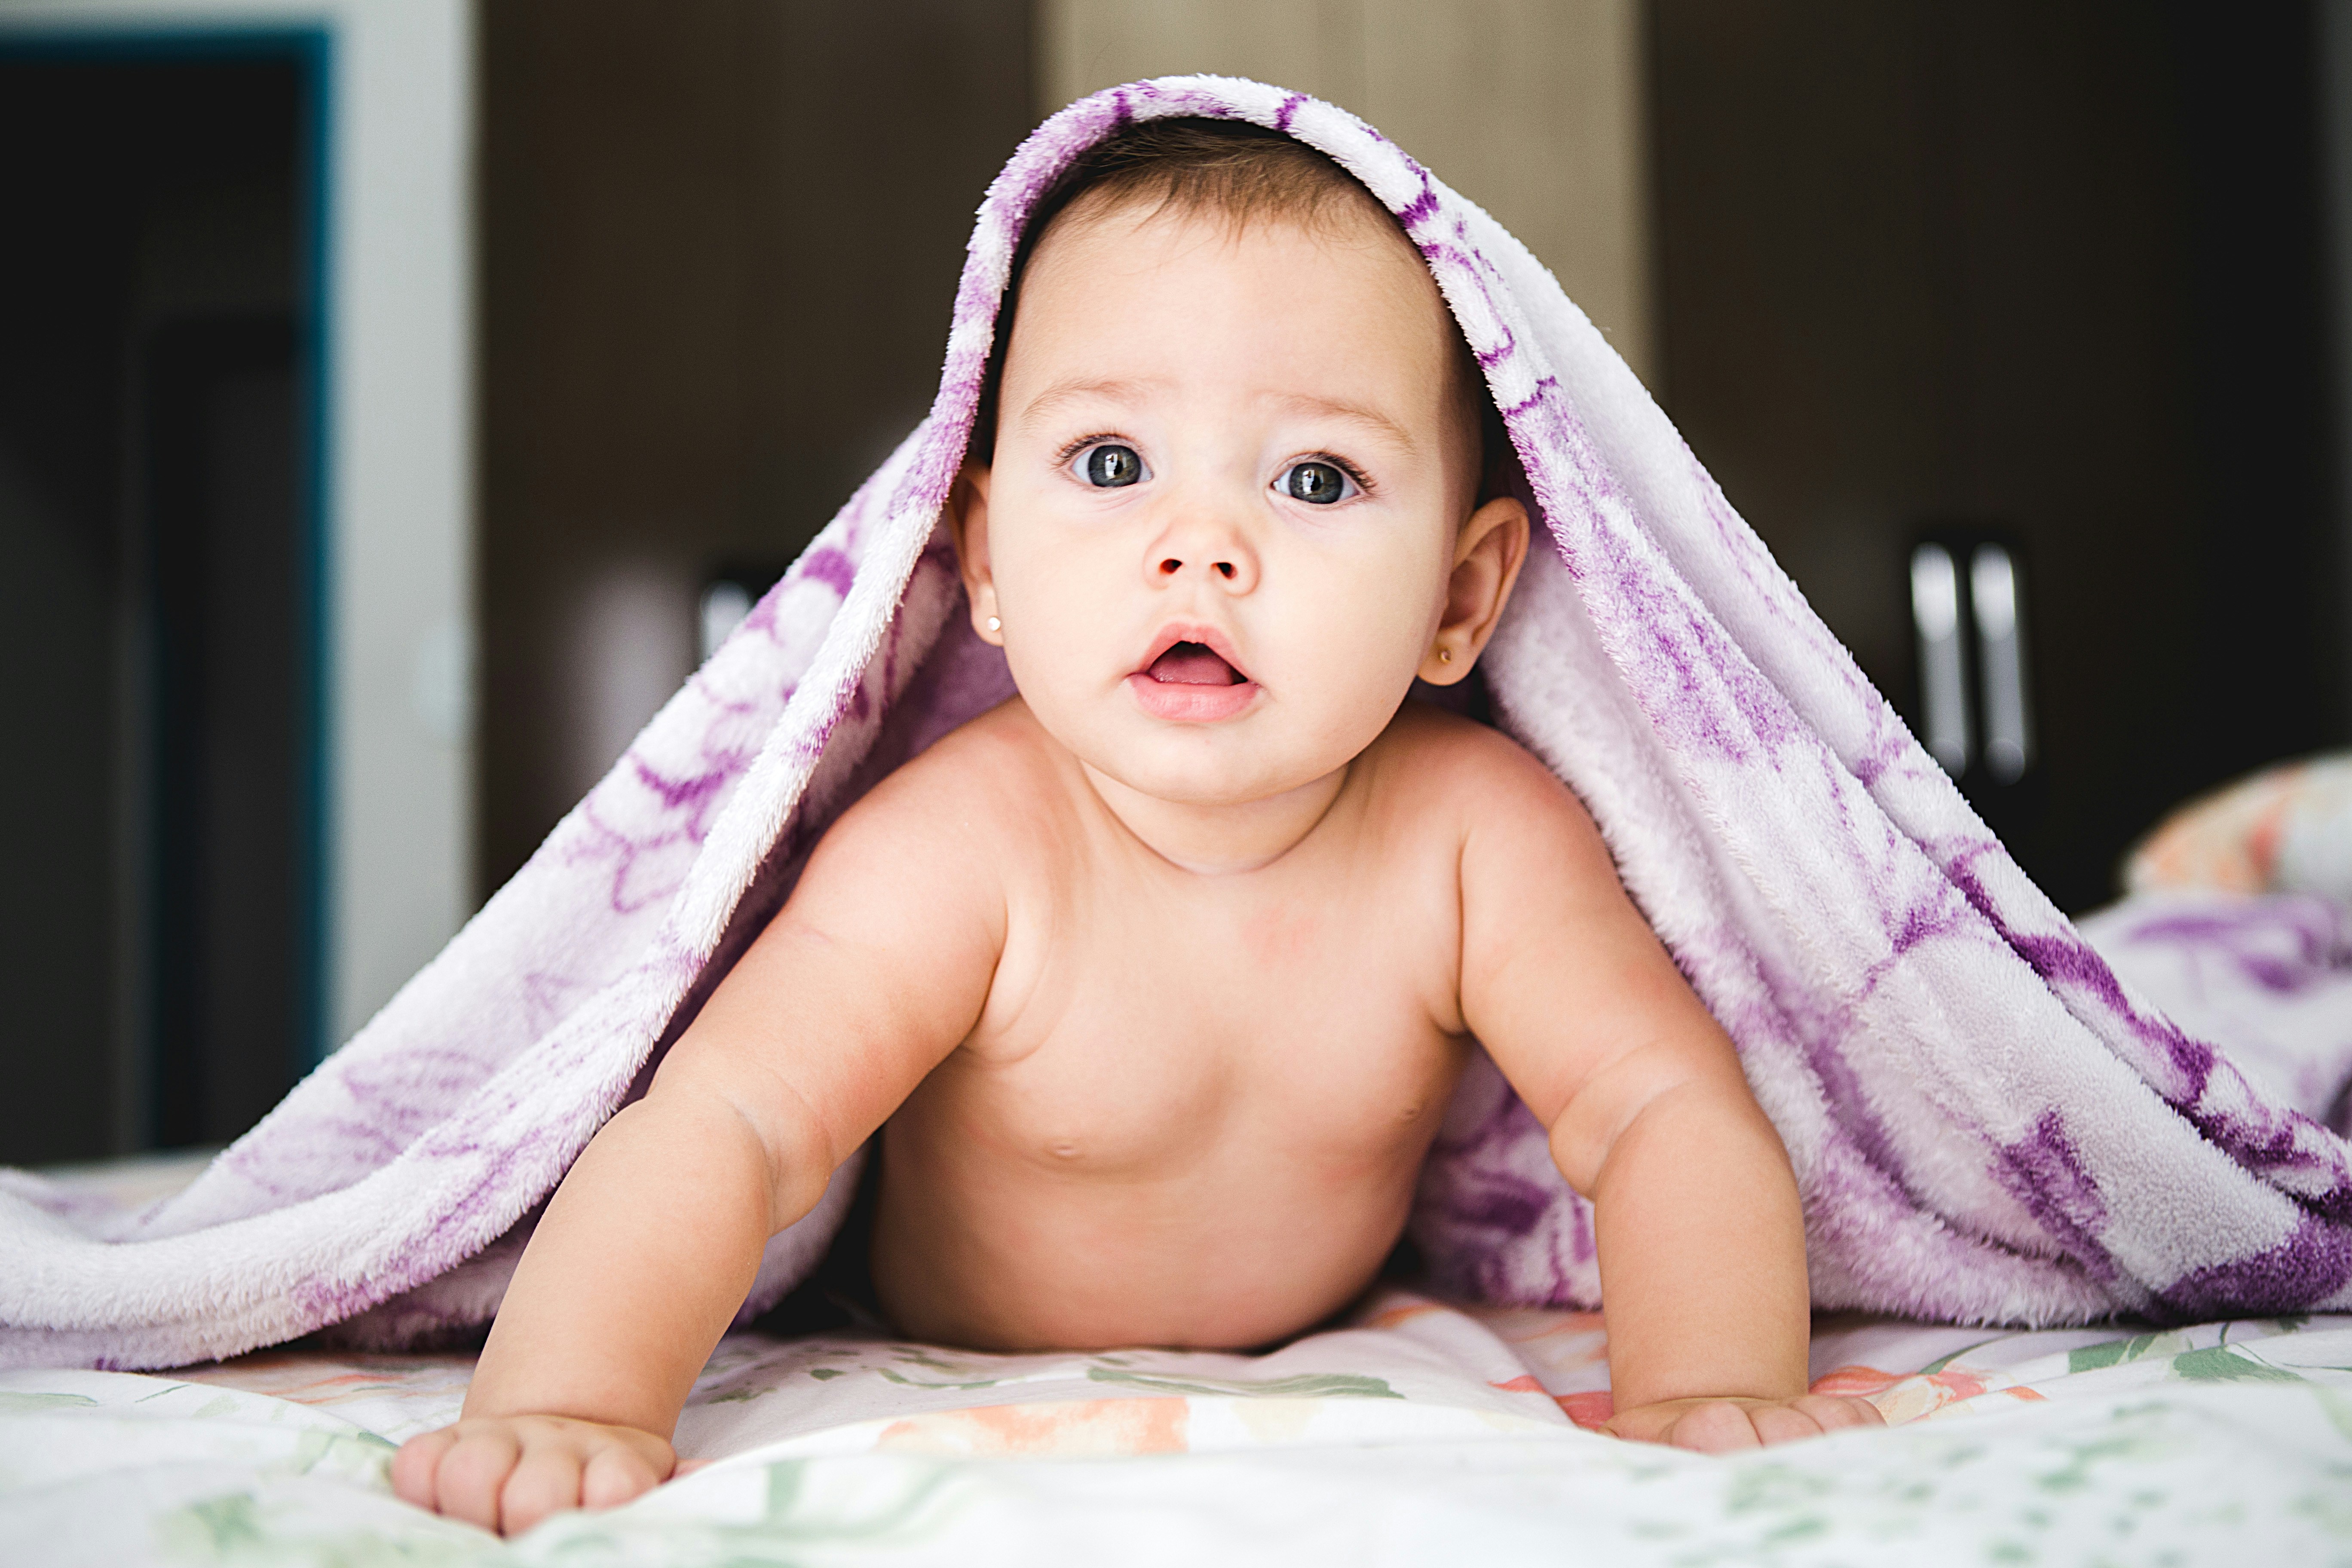 great photo recipe,how to photograph baby under purple blanket